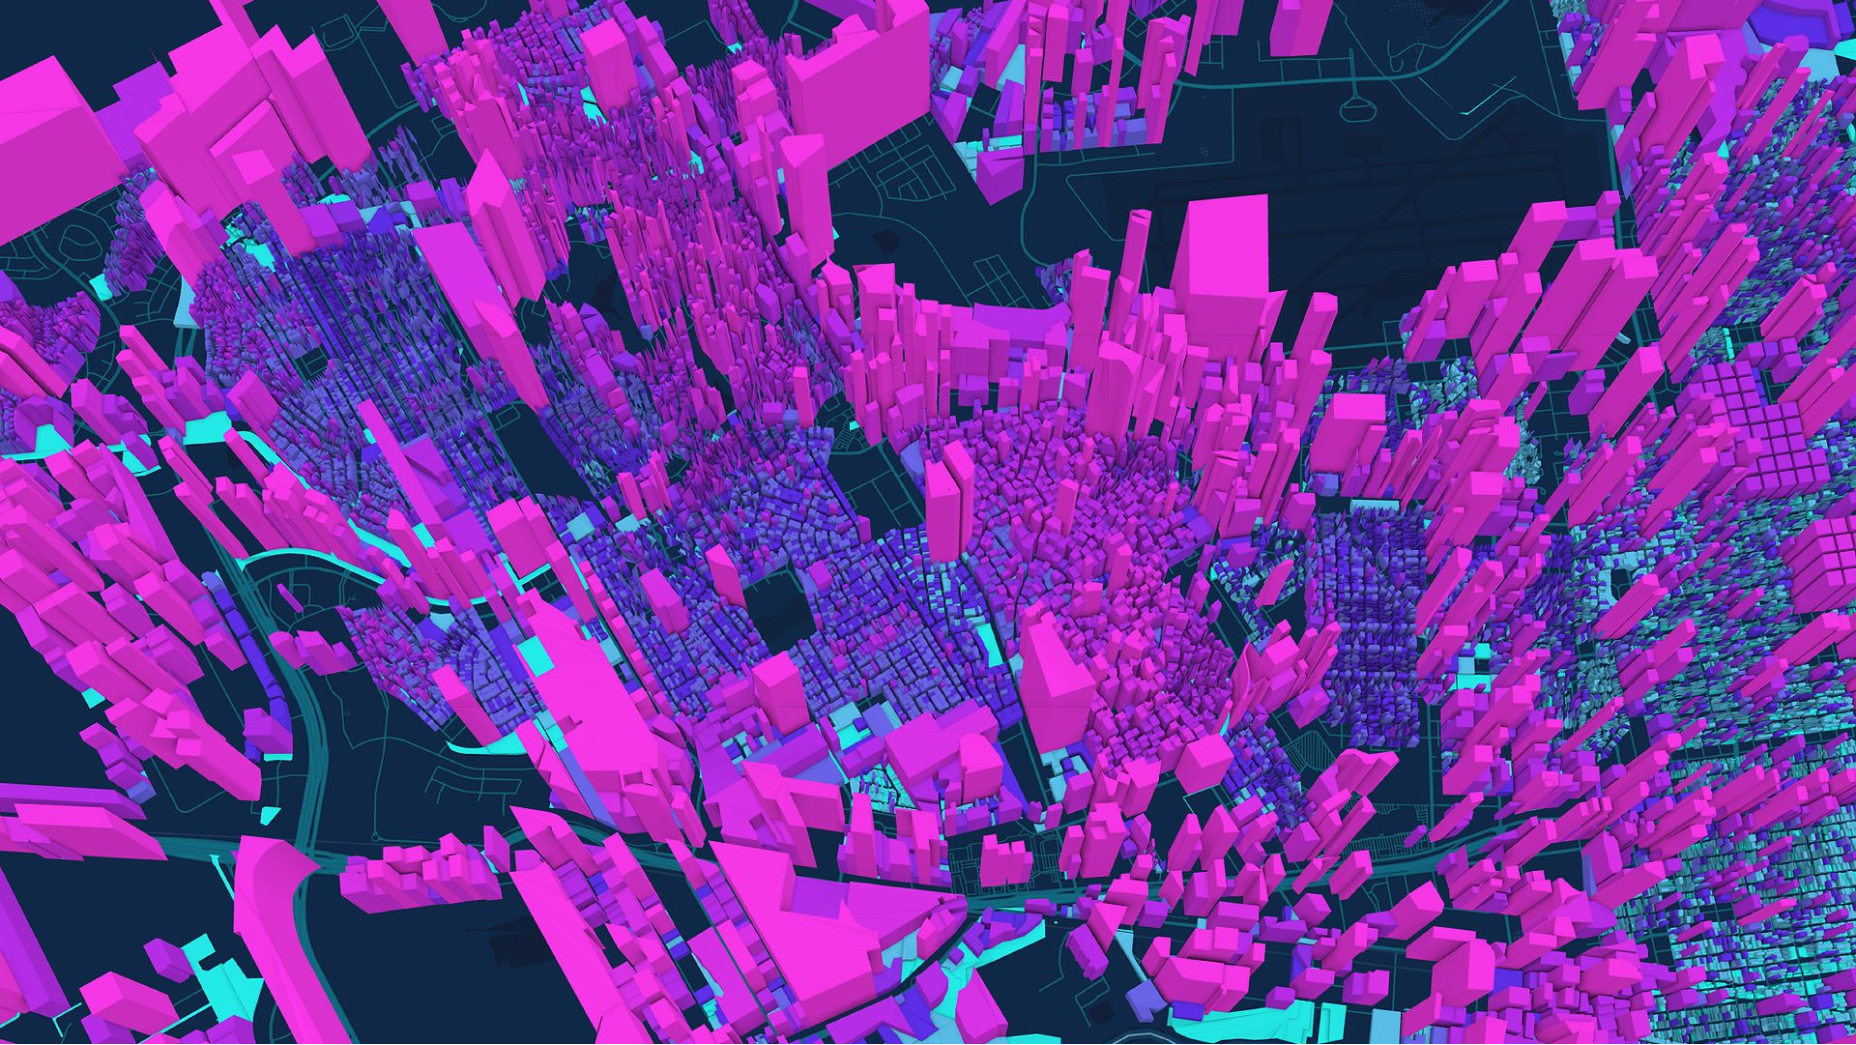 3D image of a city with buildings in purple and blue